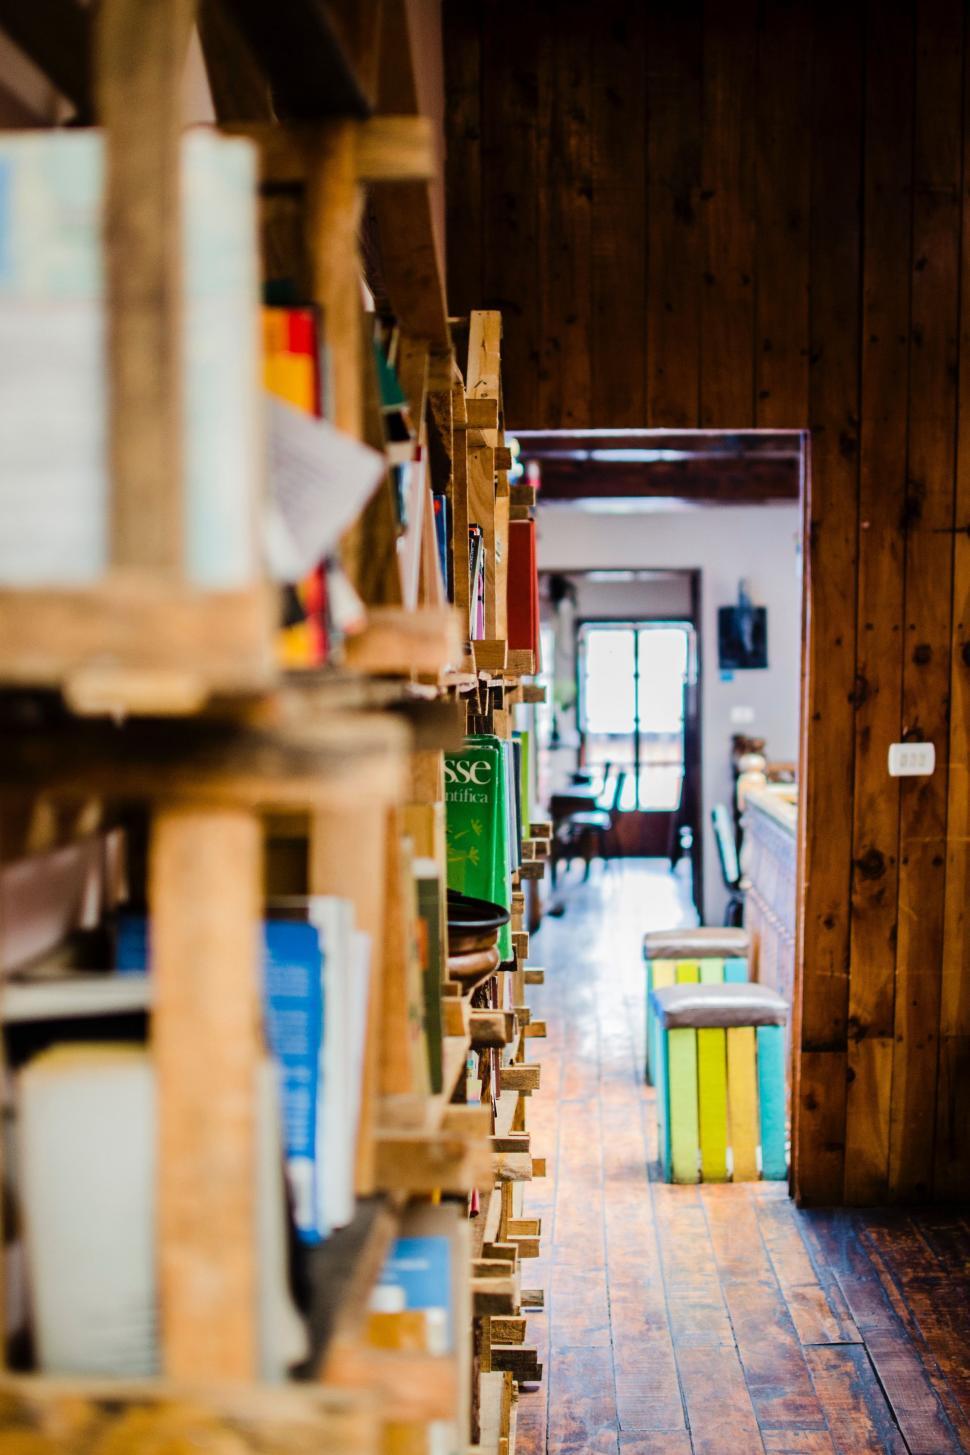 Free Image of Room Filled With Wooden Shelves Overflowing With Books 